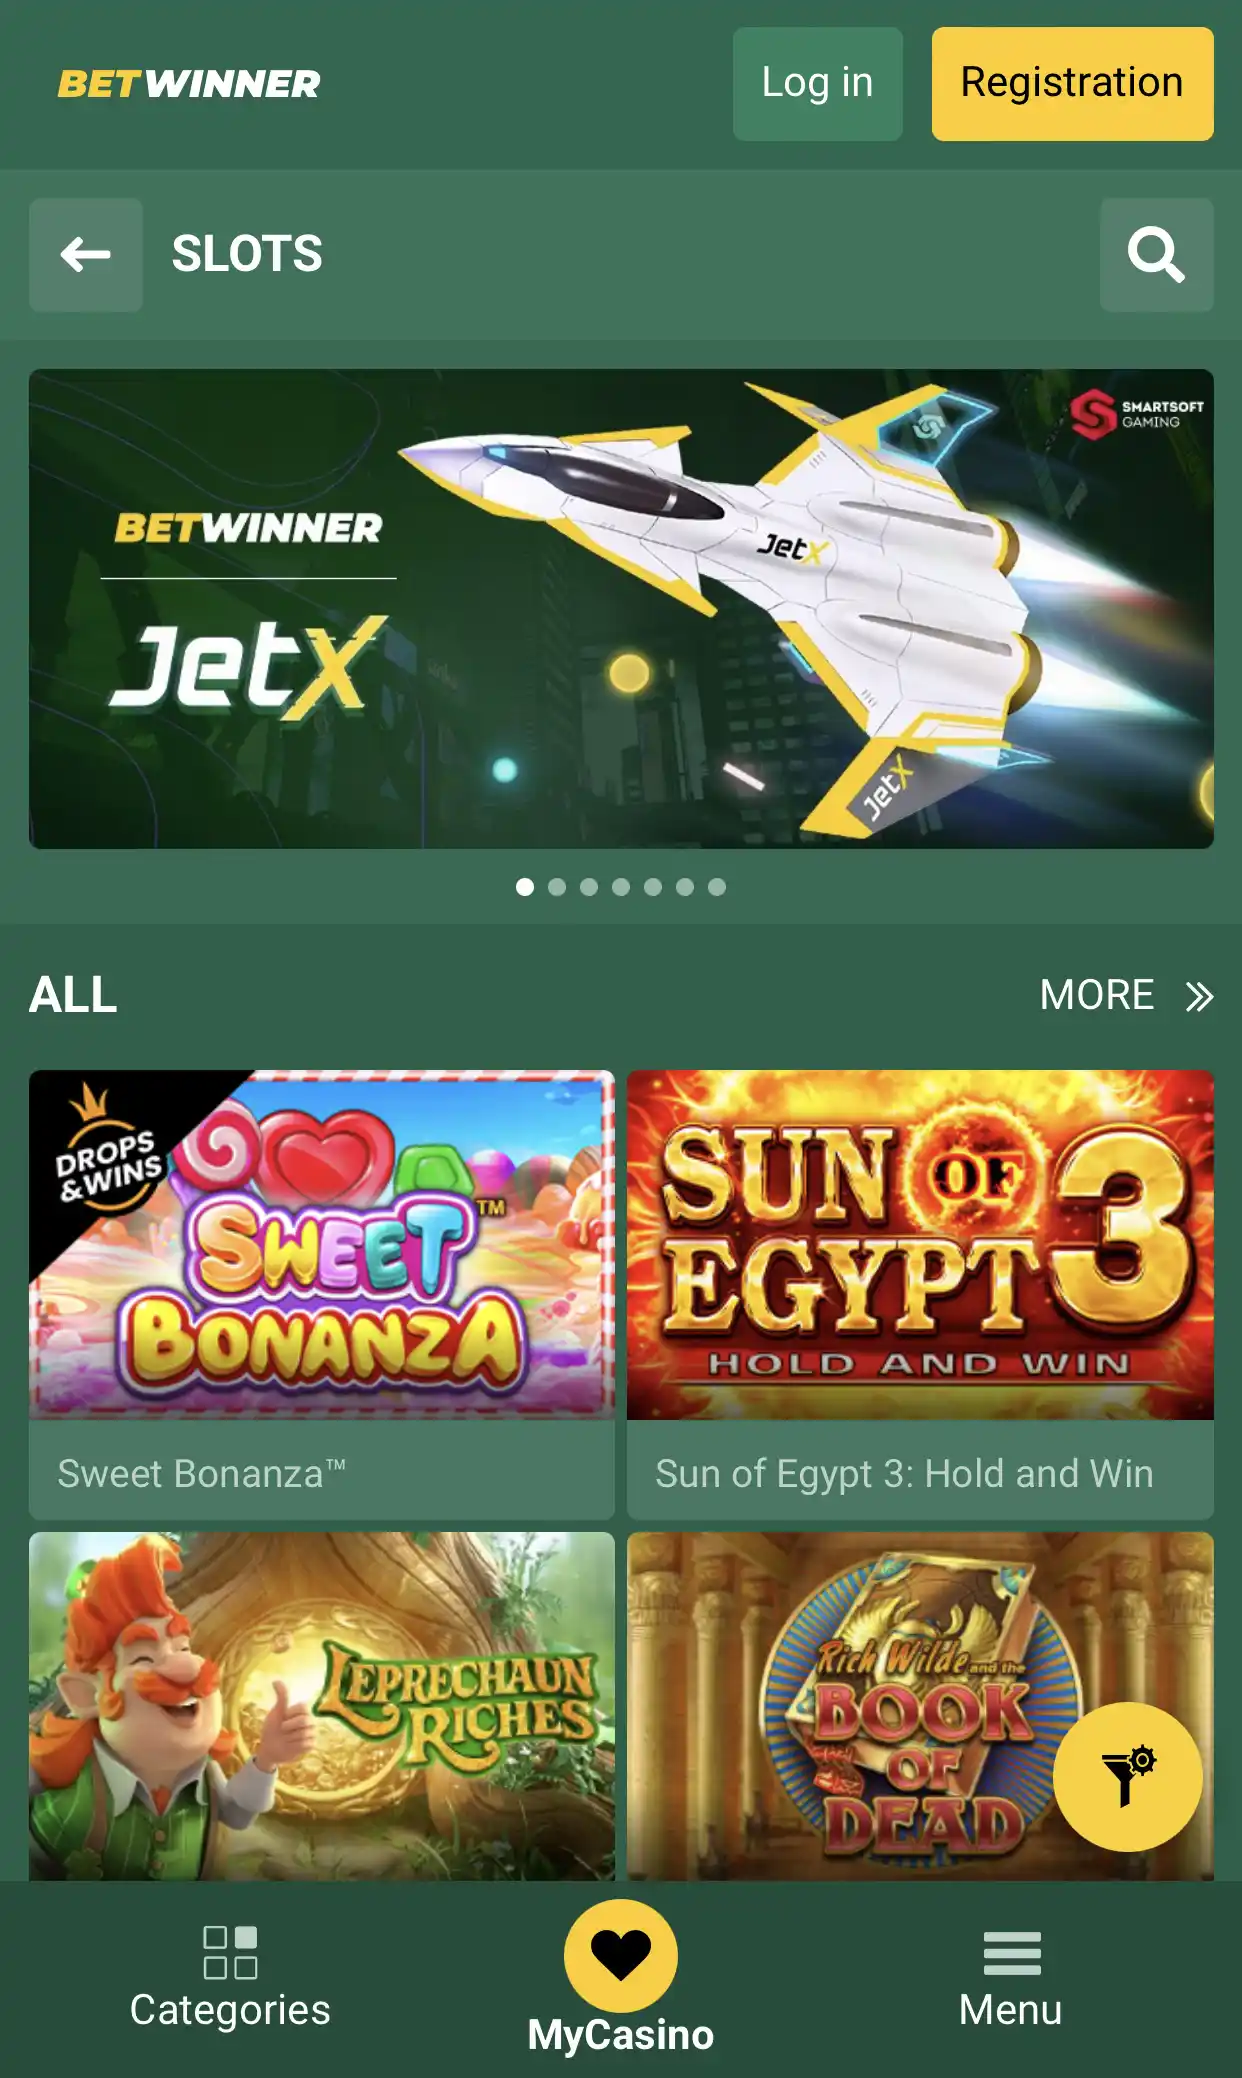 Betwinner Casino offers a huge selection of games to suit all tastes.